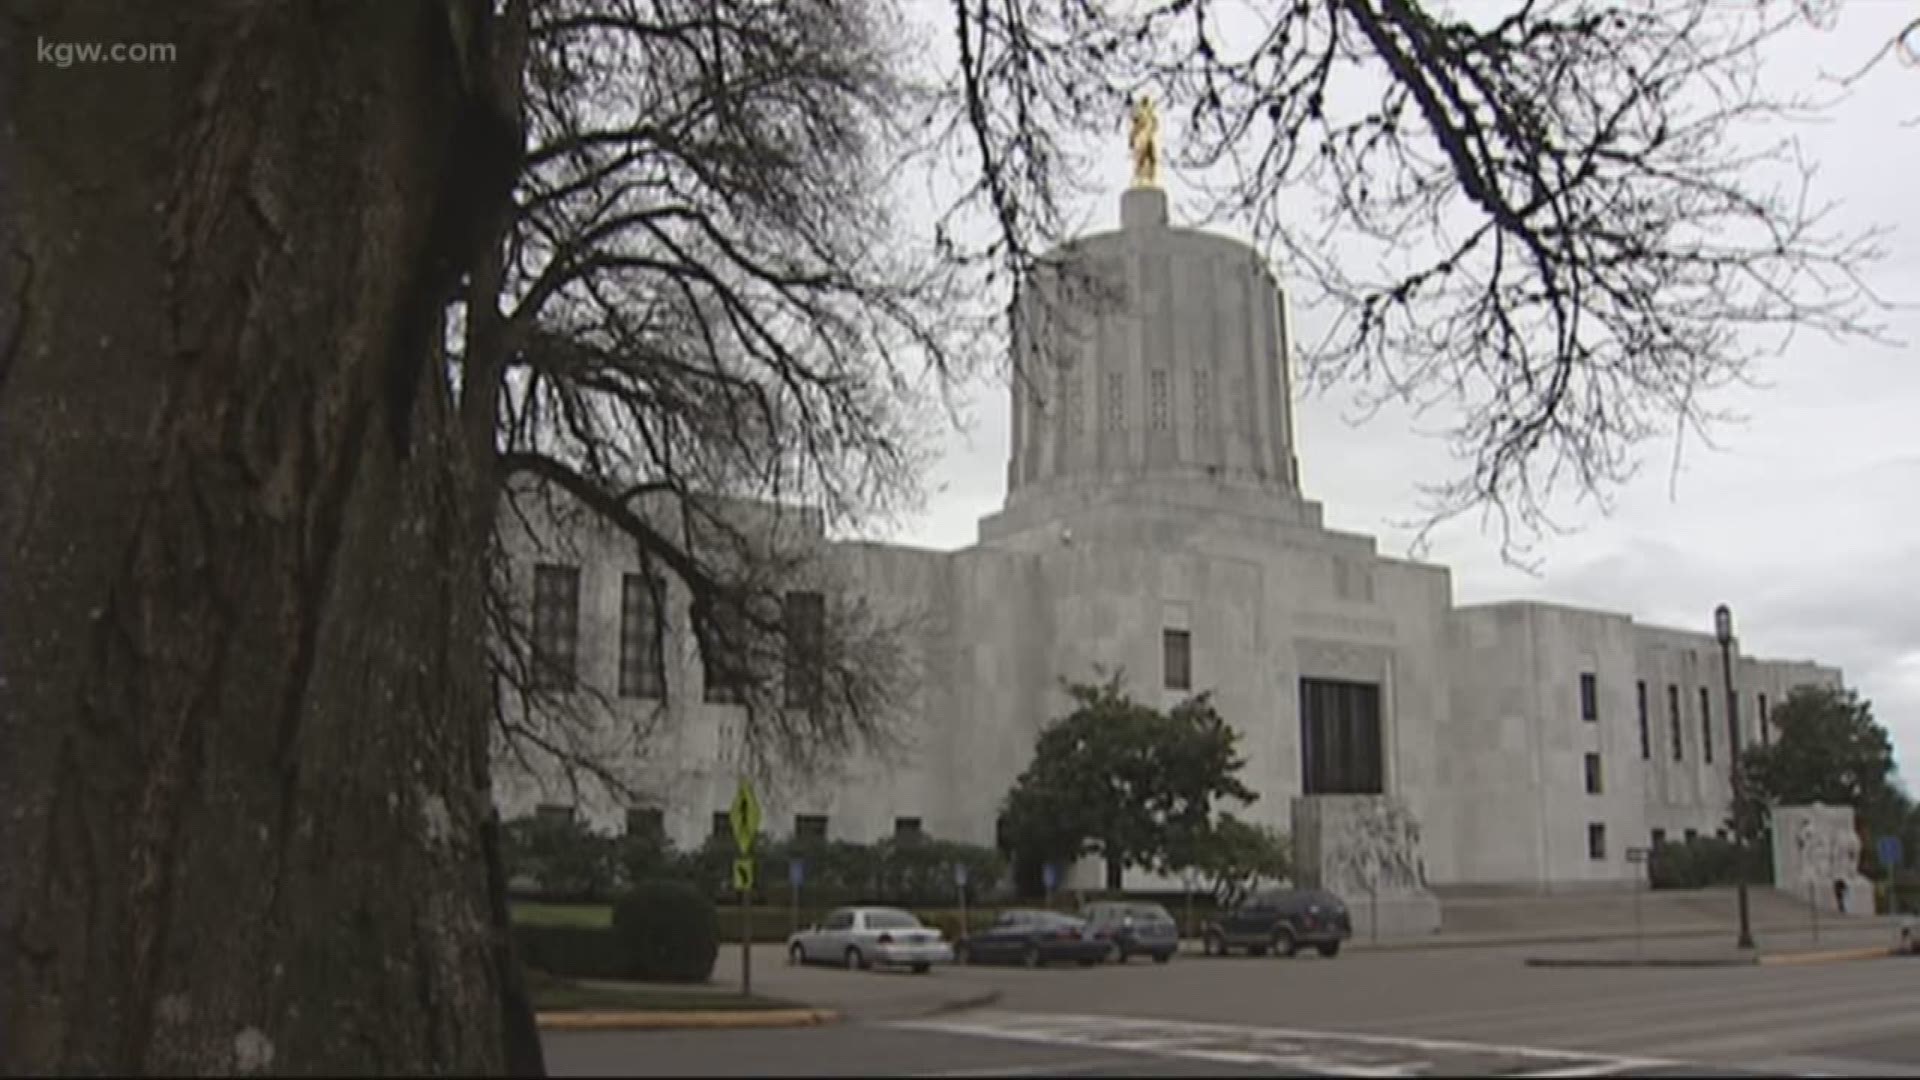 The Oregon Legislature settled a sexual harassment lawsuit with 9 victims.